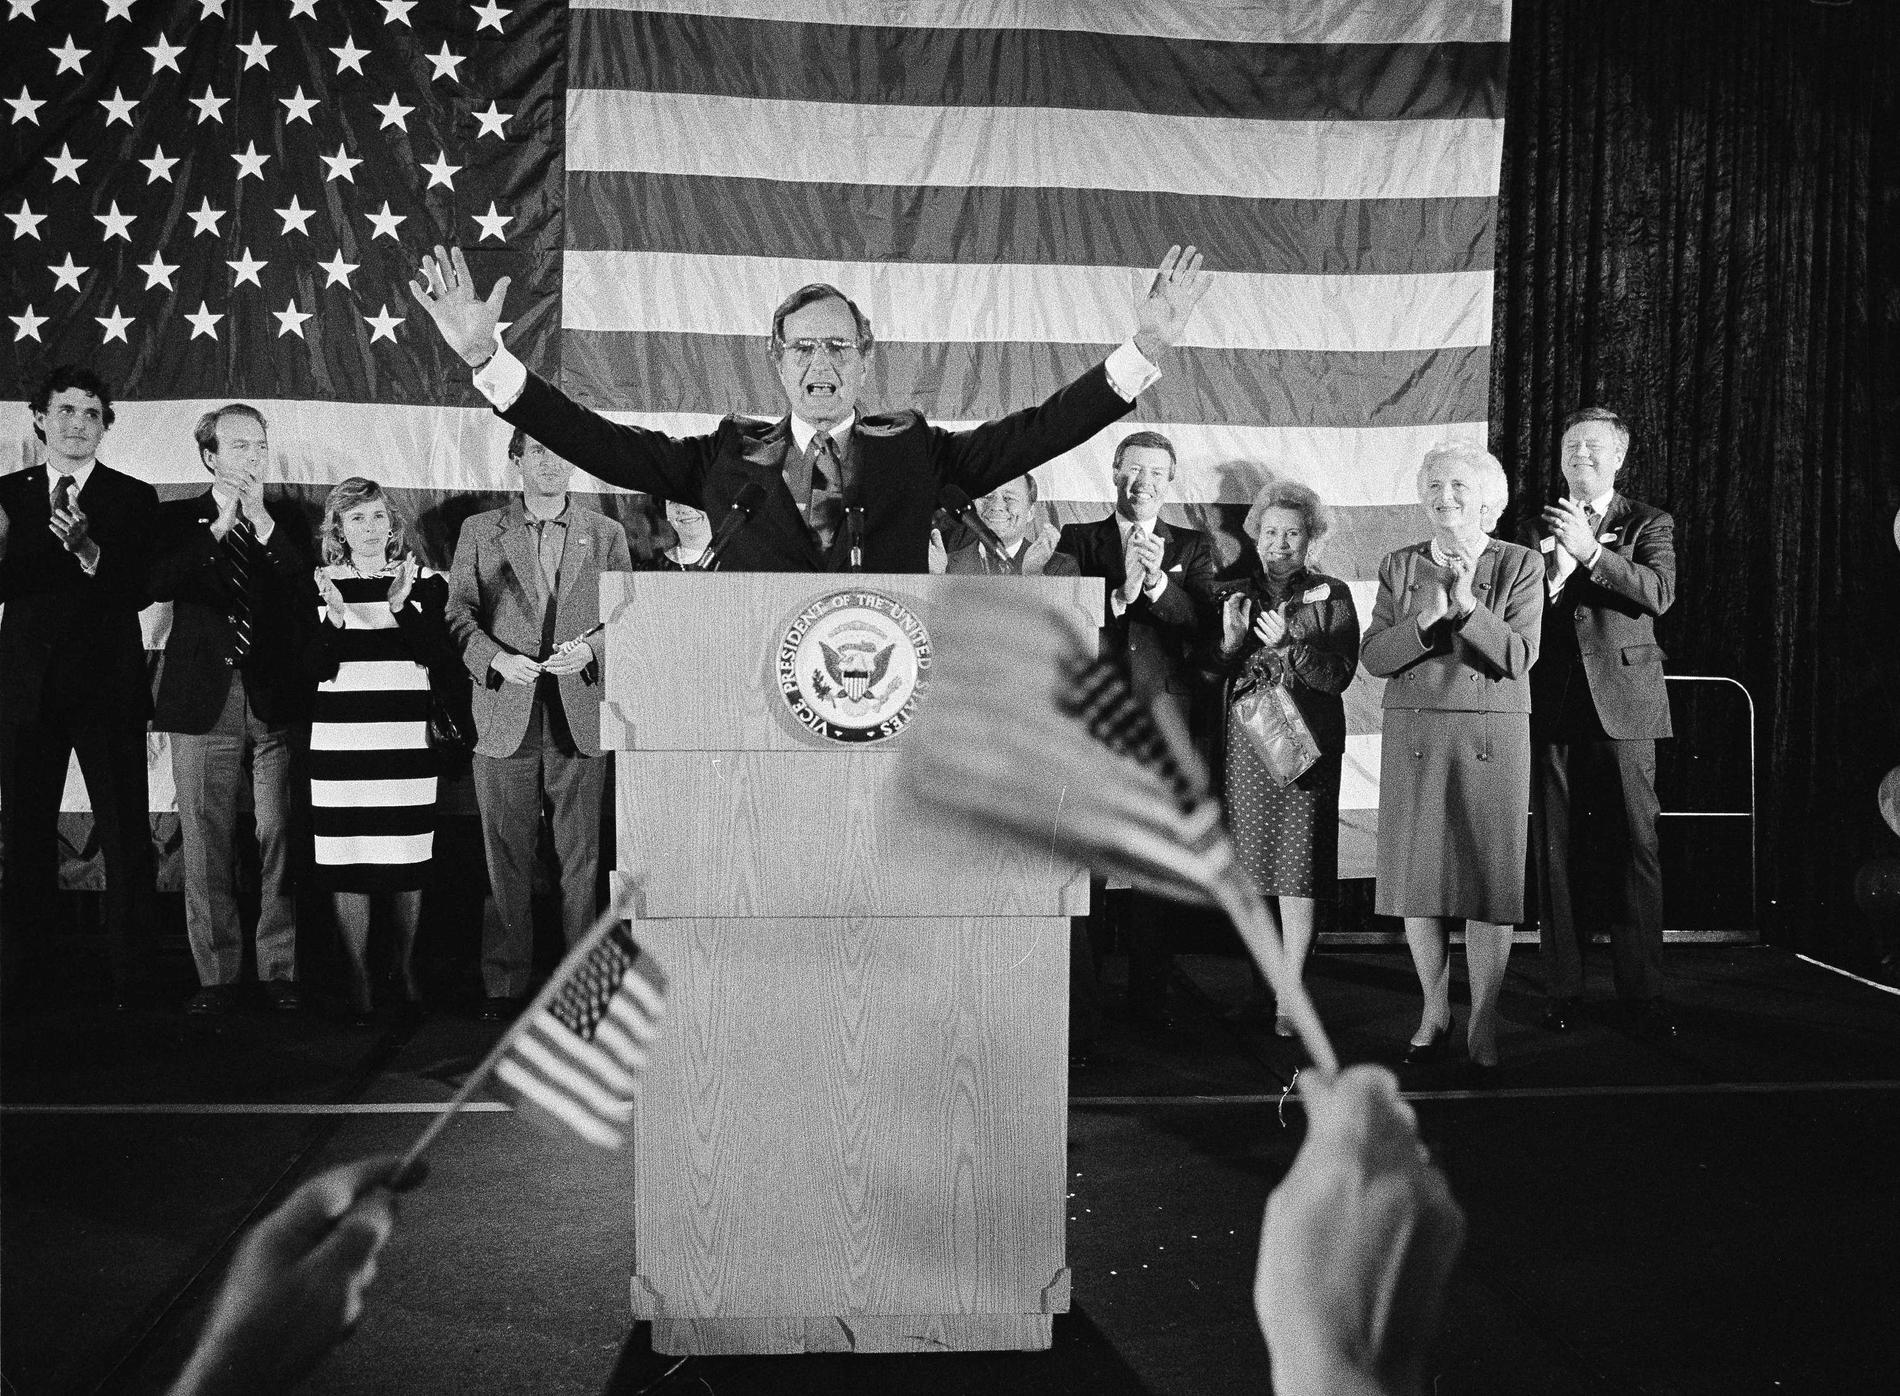 n this Nov. 7, 1984 file photo, flag-wavers greet Vice President George Bush after he was re-elected to the post of vice president, in Houston, Texas. The vice president's wife Barbara Bush is seen second from right. 